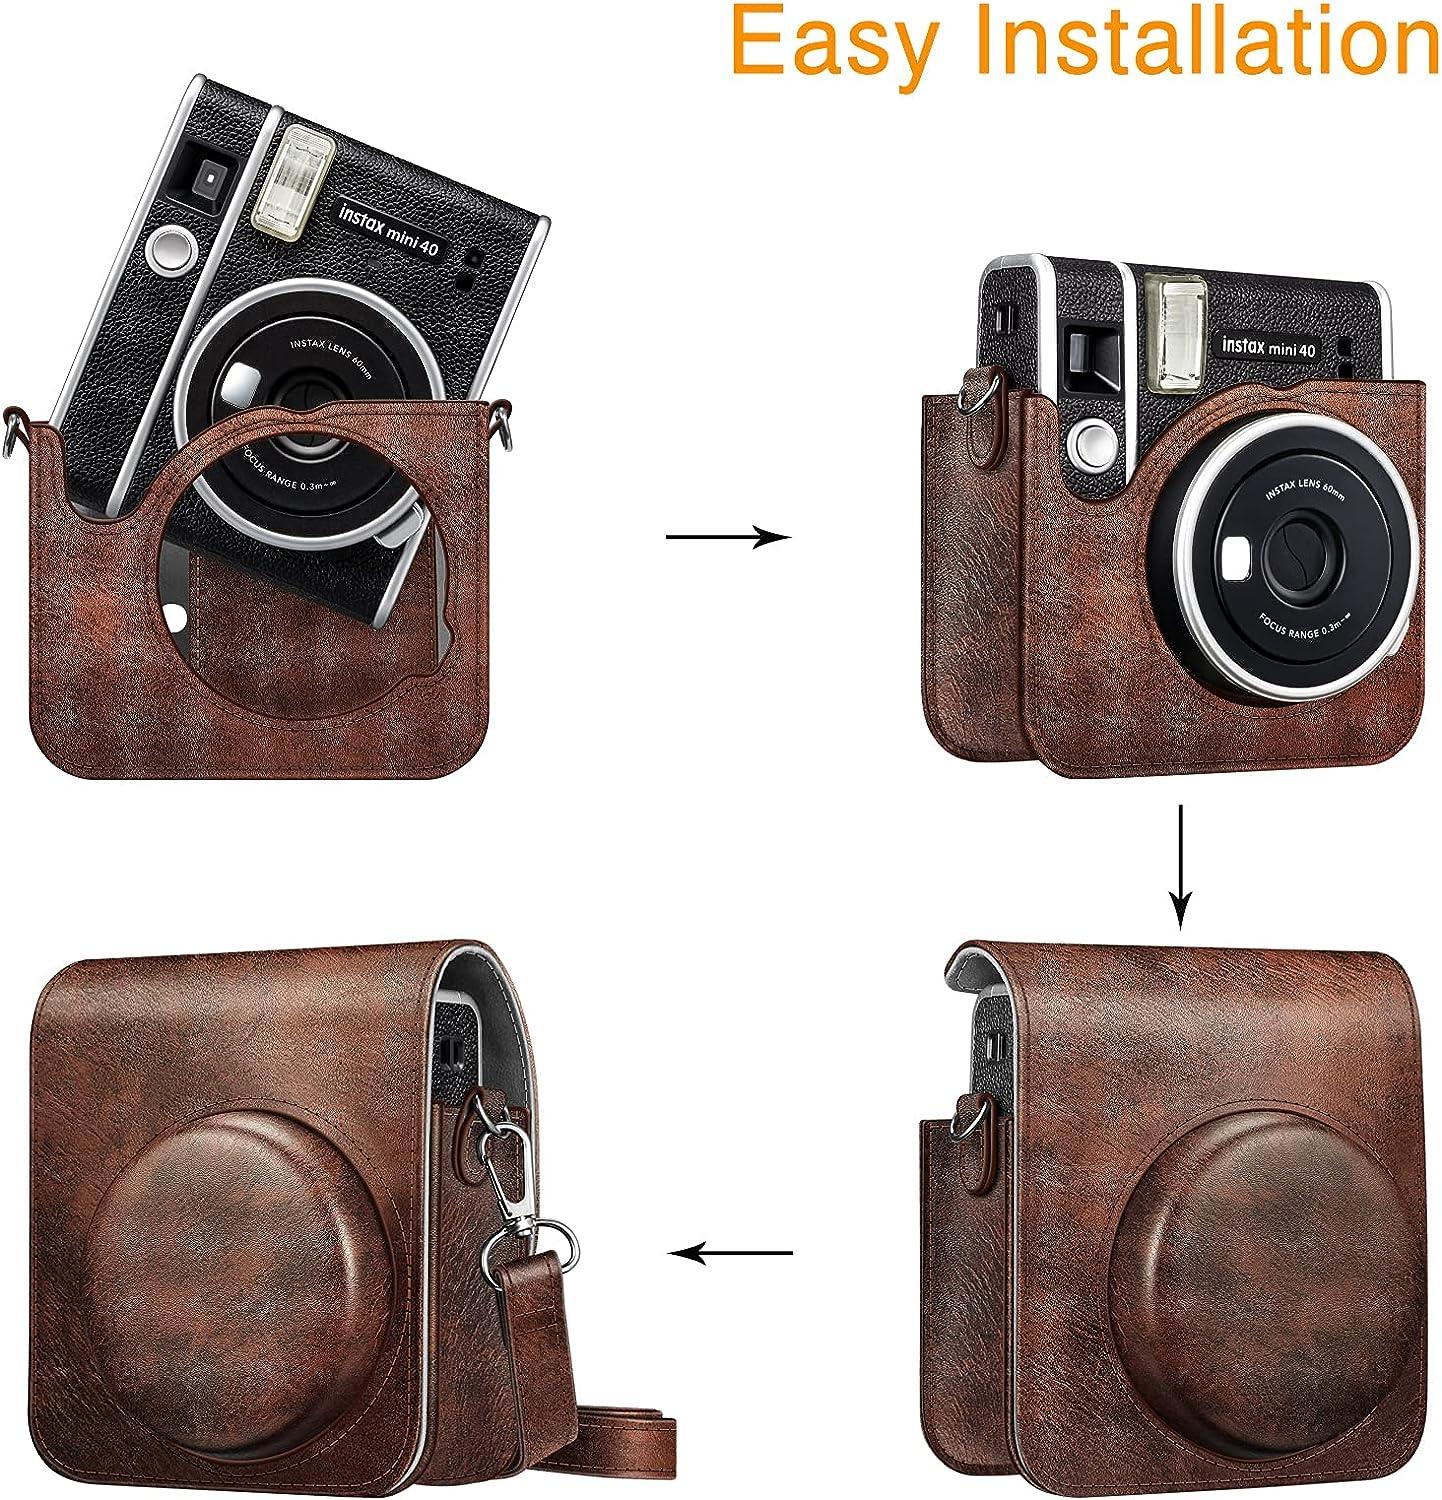 Fintie Protective Case for Fujifilm Instax Mini 40 Instant Camera - Premium  Vegan Leather Bag Cover with Removable Adjustable Strap, Vintage Brown